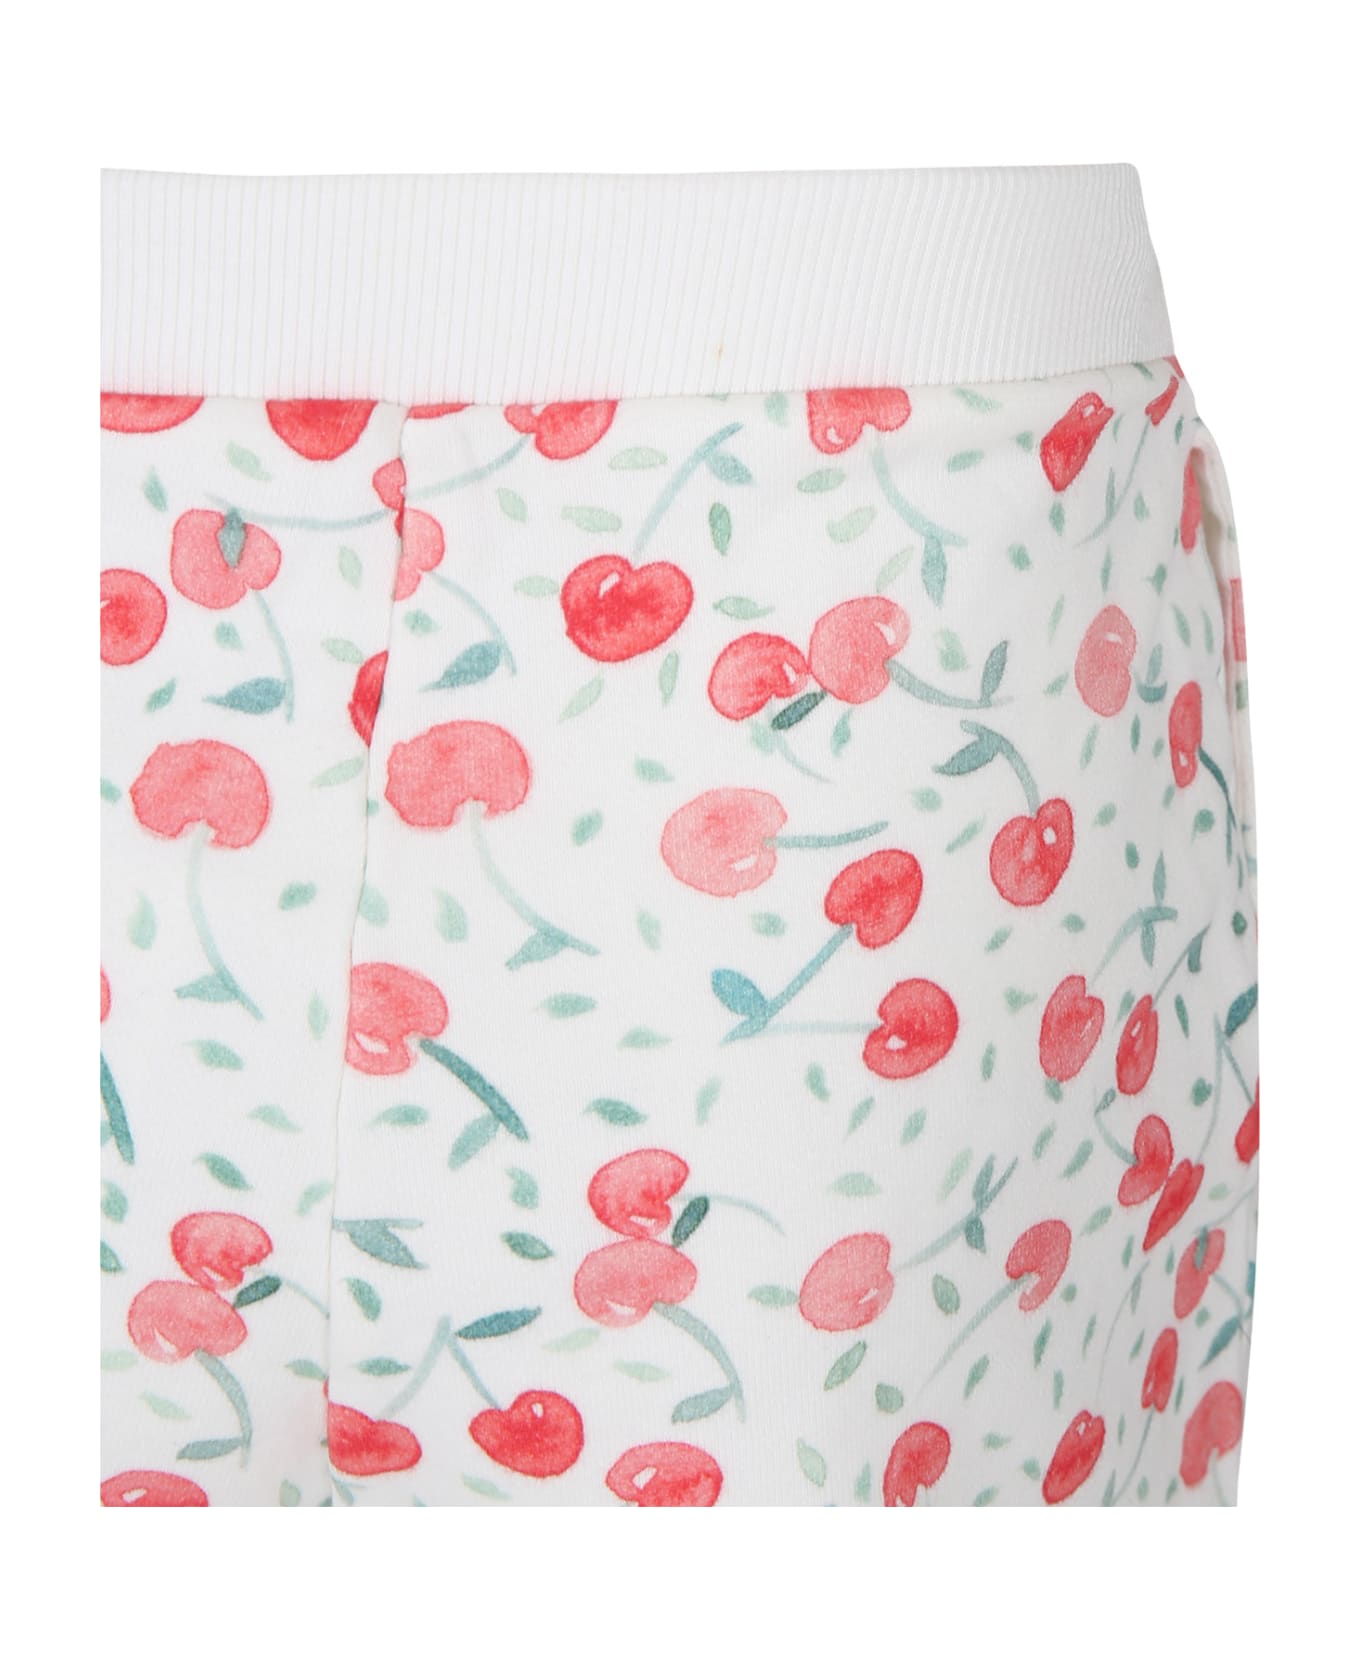 Bonpoint Ivory Sports Shorts For Girl With Cherries - Ivory